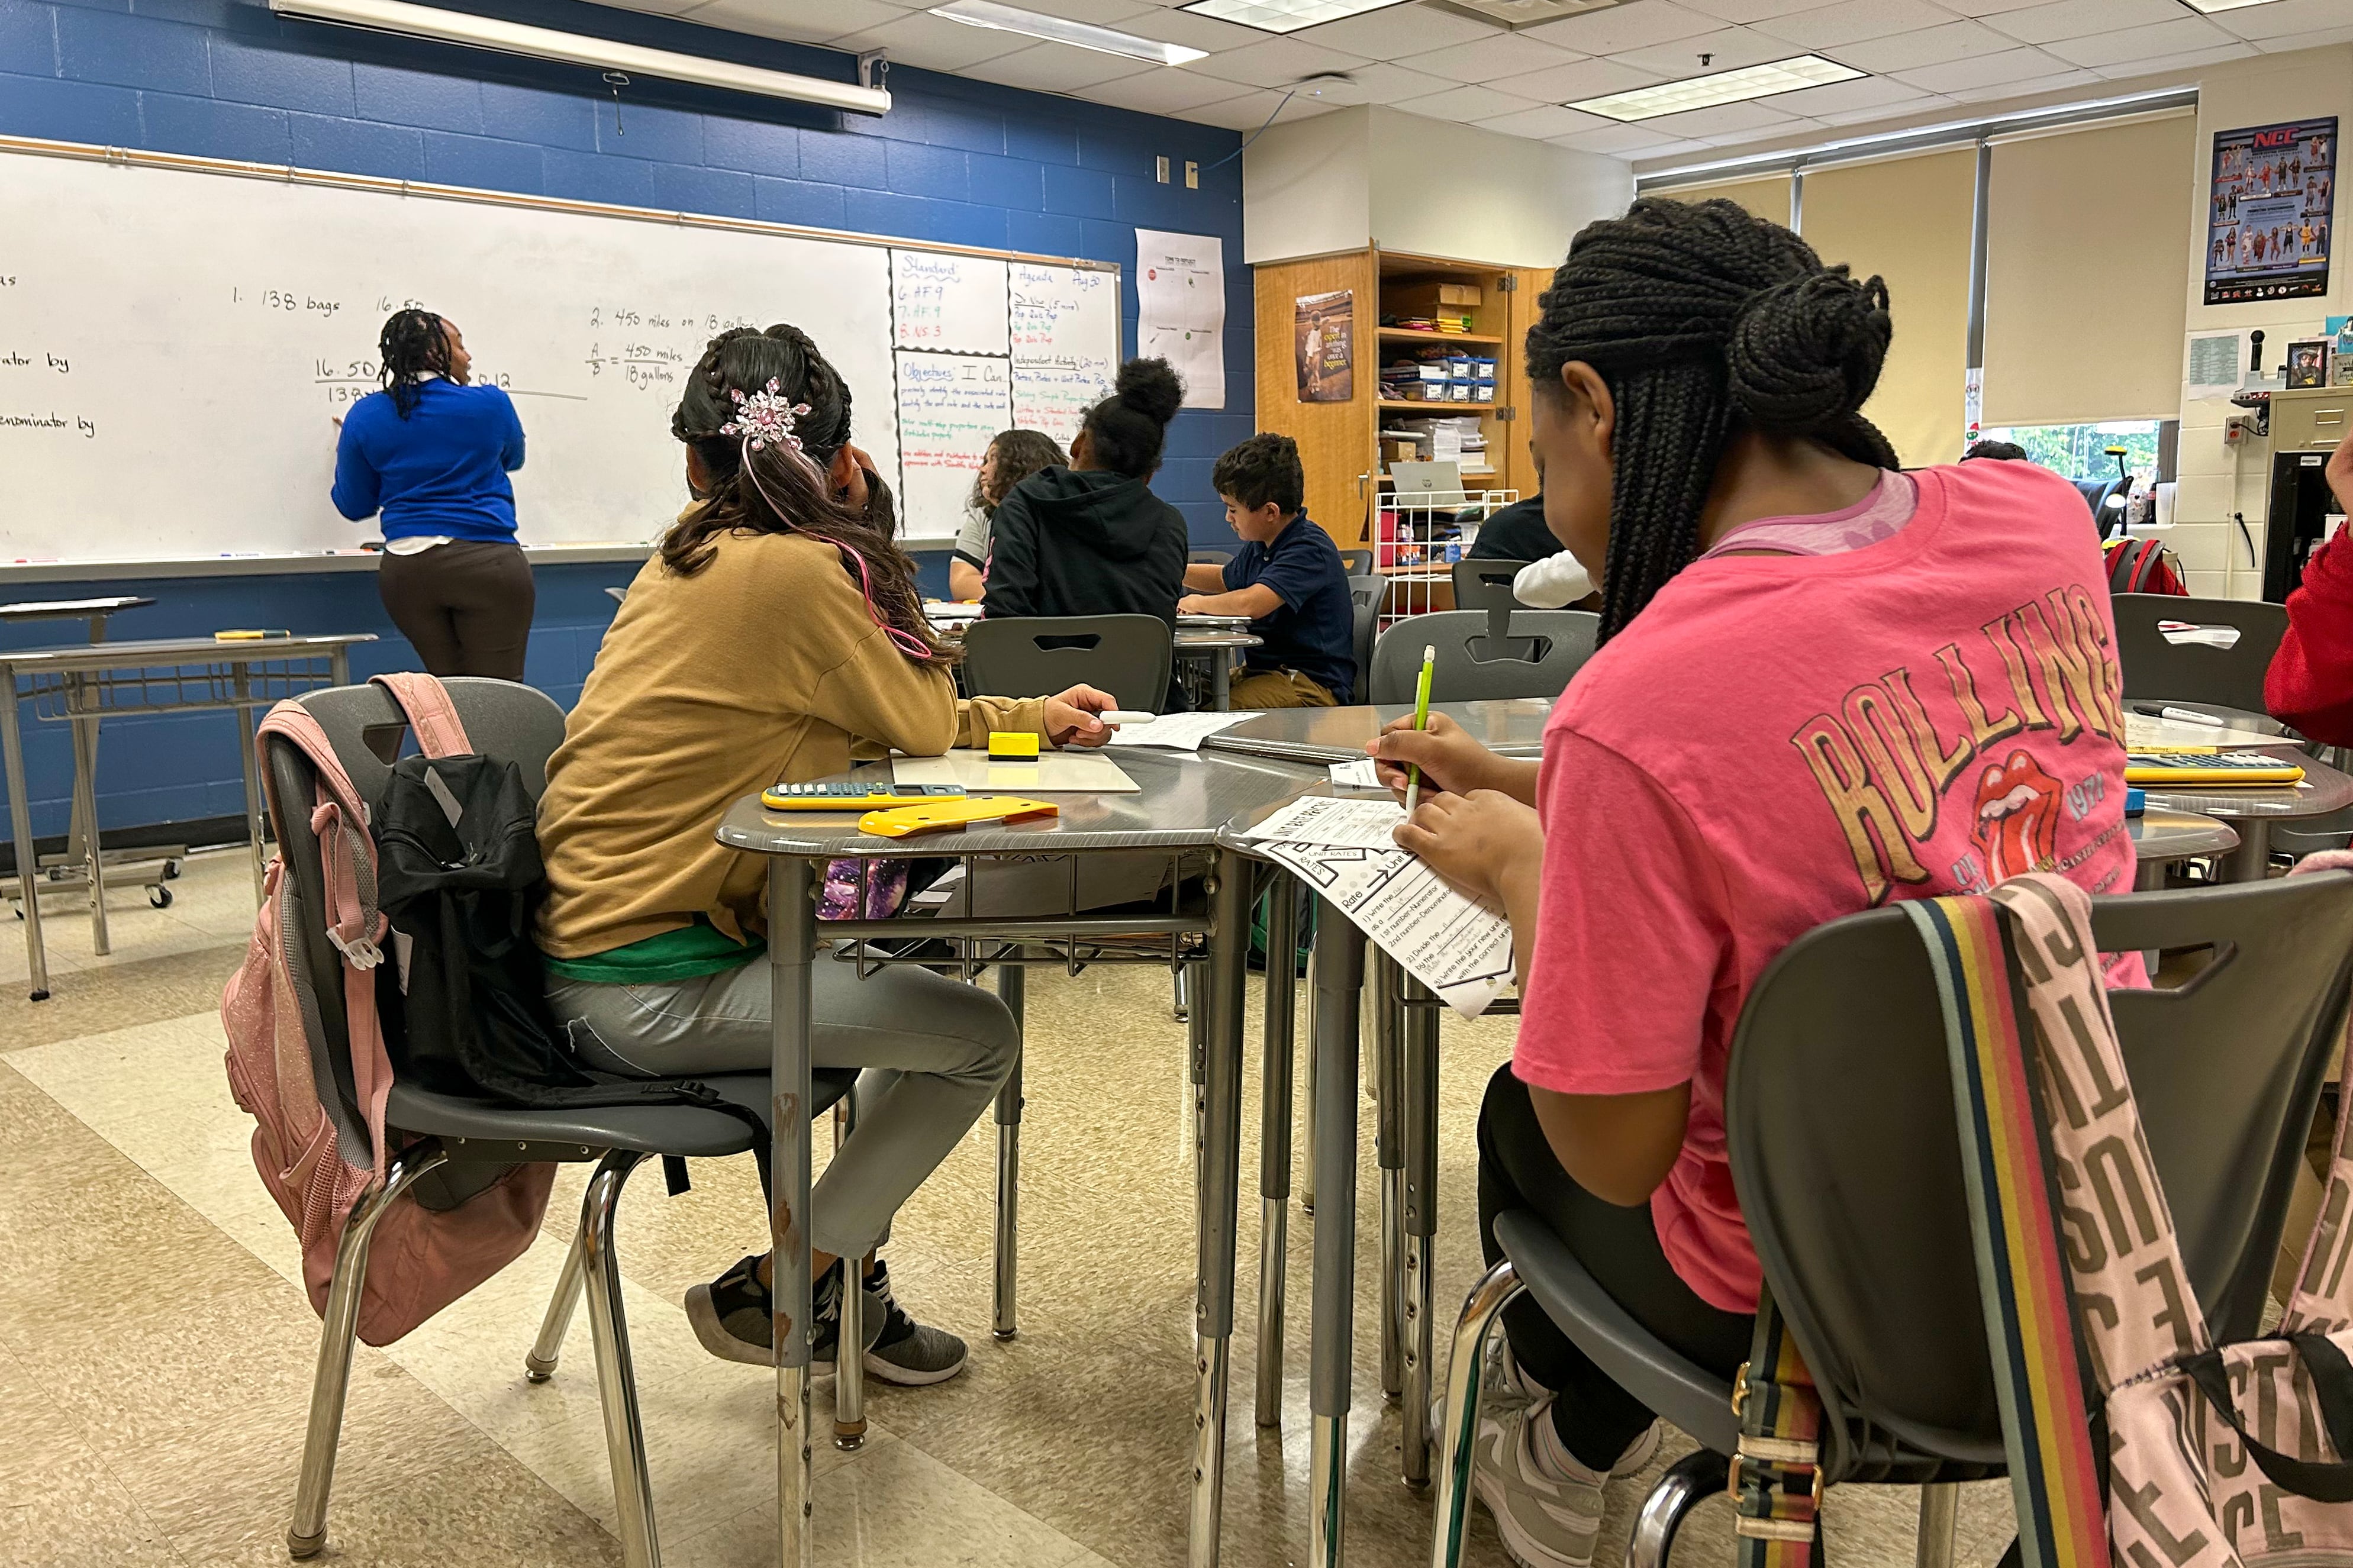 A student wearing a pink shirt sits at a table with other students in a classroom. In the background, a teacher in a blue top writes on the whiteboard.